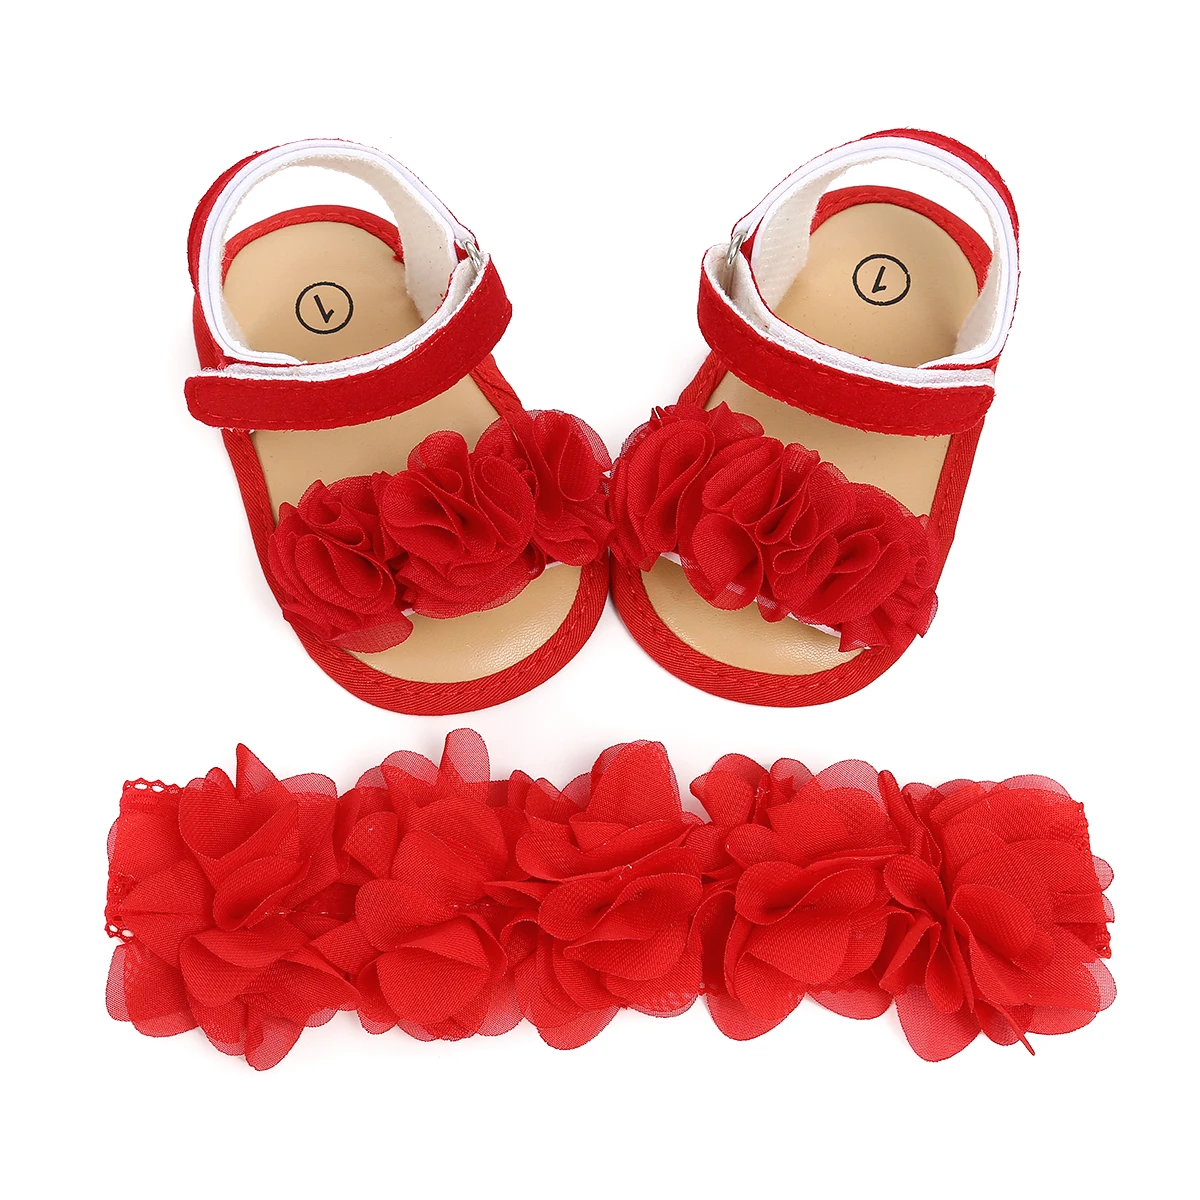 Breathable PU Leather Baby Sandals For Comfortable Summer Adventures Baby Shoes